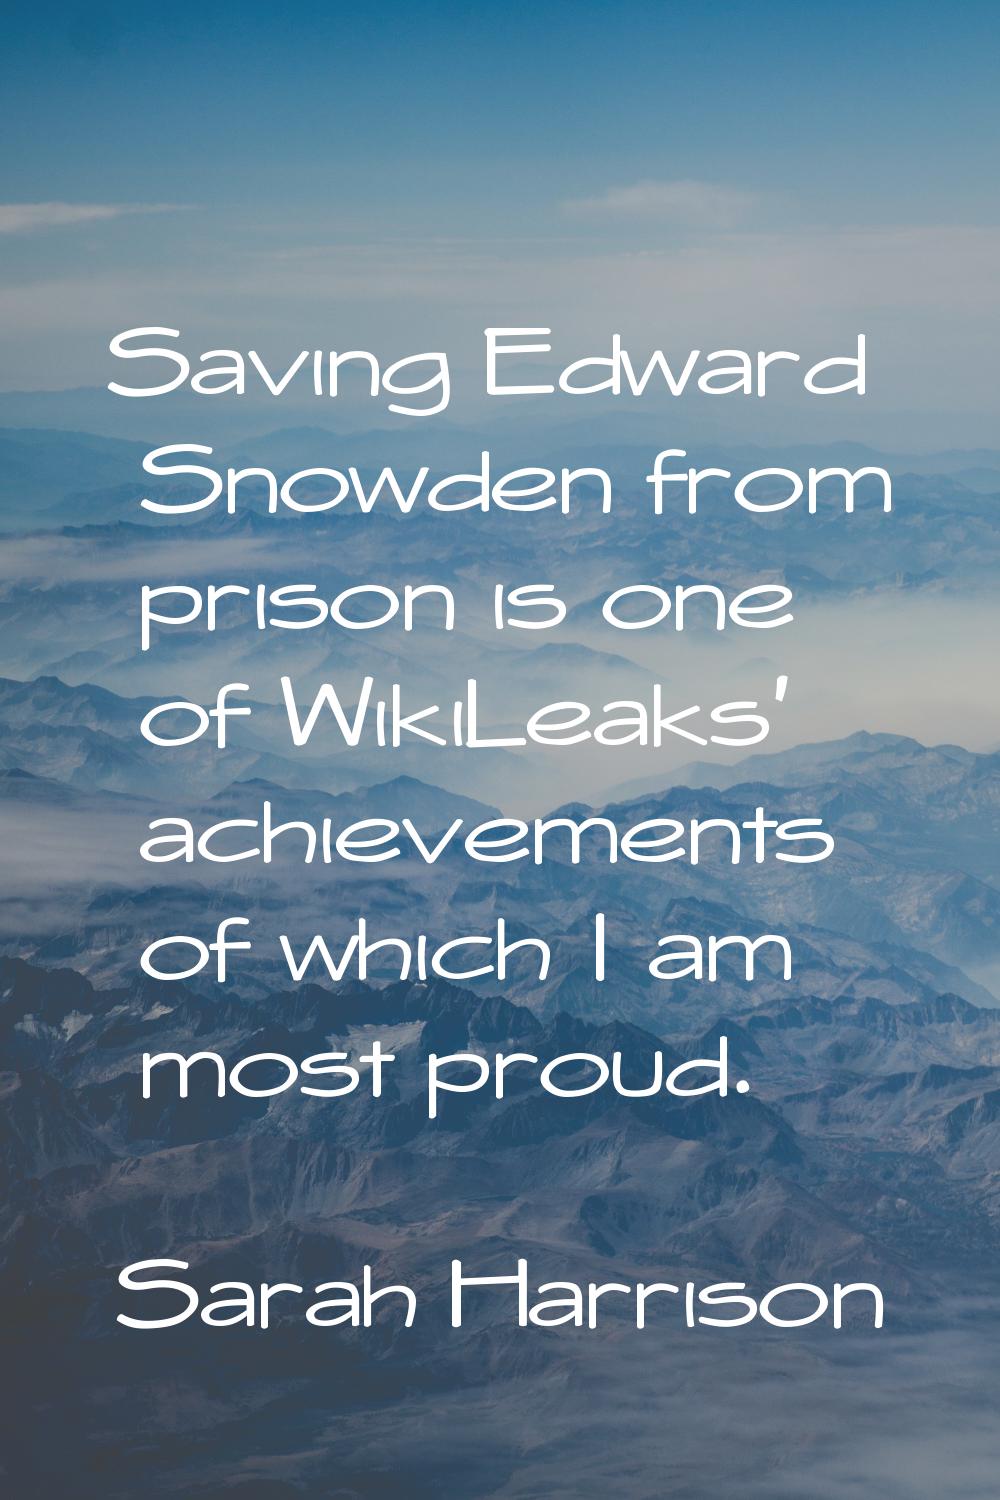 Saving Edward Snowden from prison is one of WikiLeaks' achievements of which I am most proud.